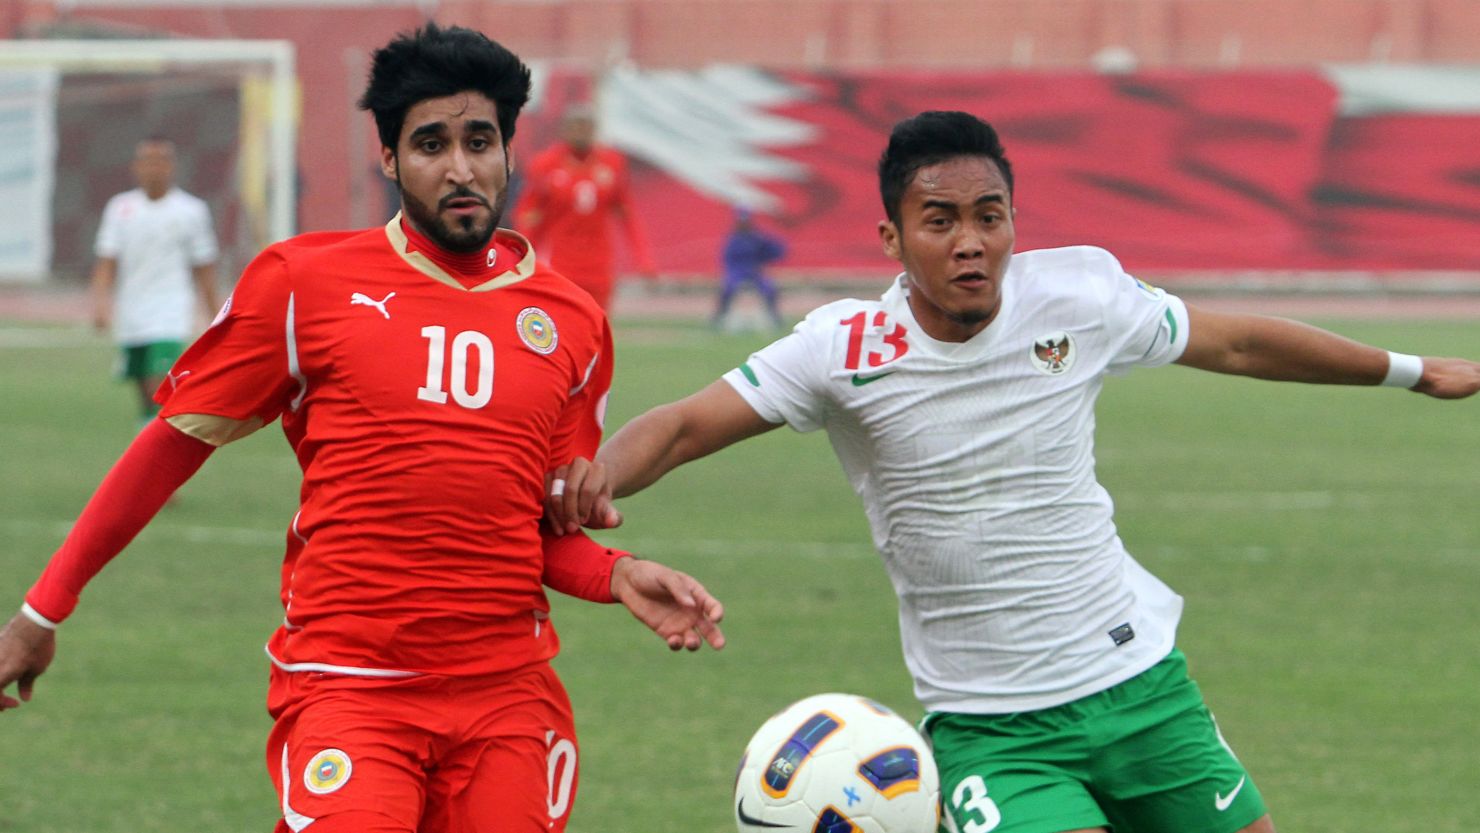 Bahrain's Mohammed Ali (left) battles for the ball with Indonesia's Guvan Dwicahyo during Wednesday's match.